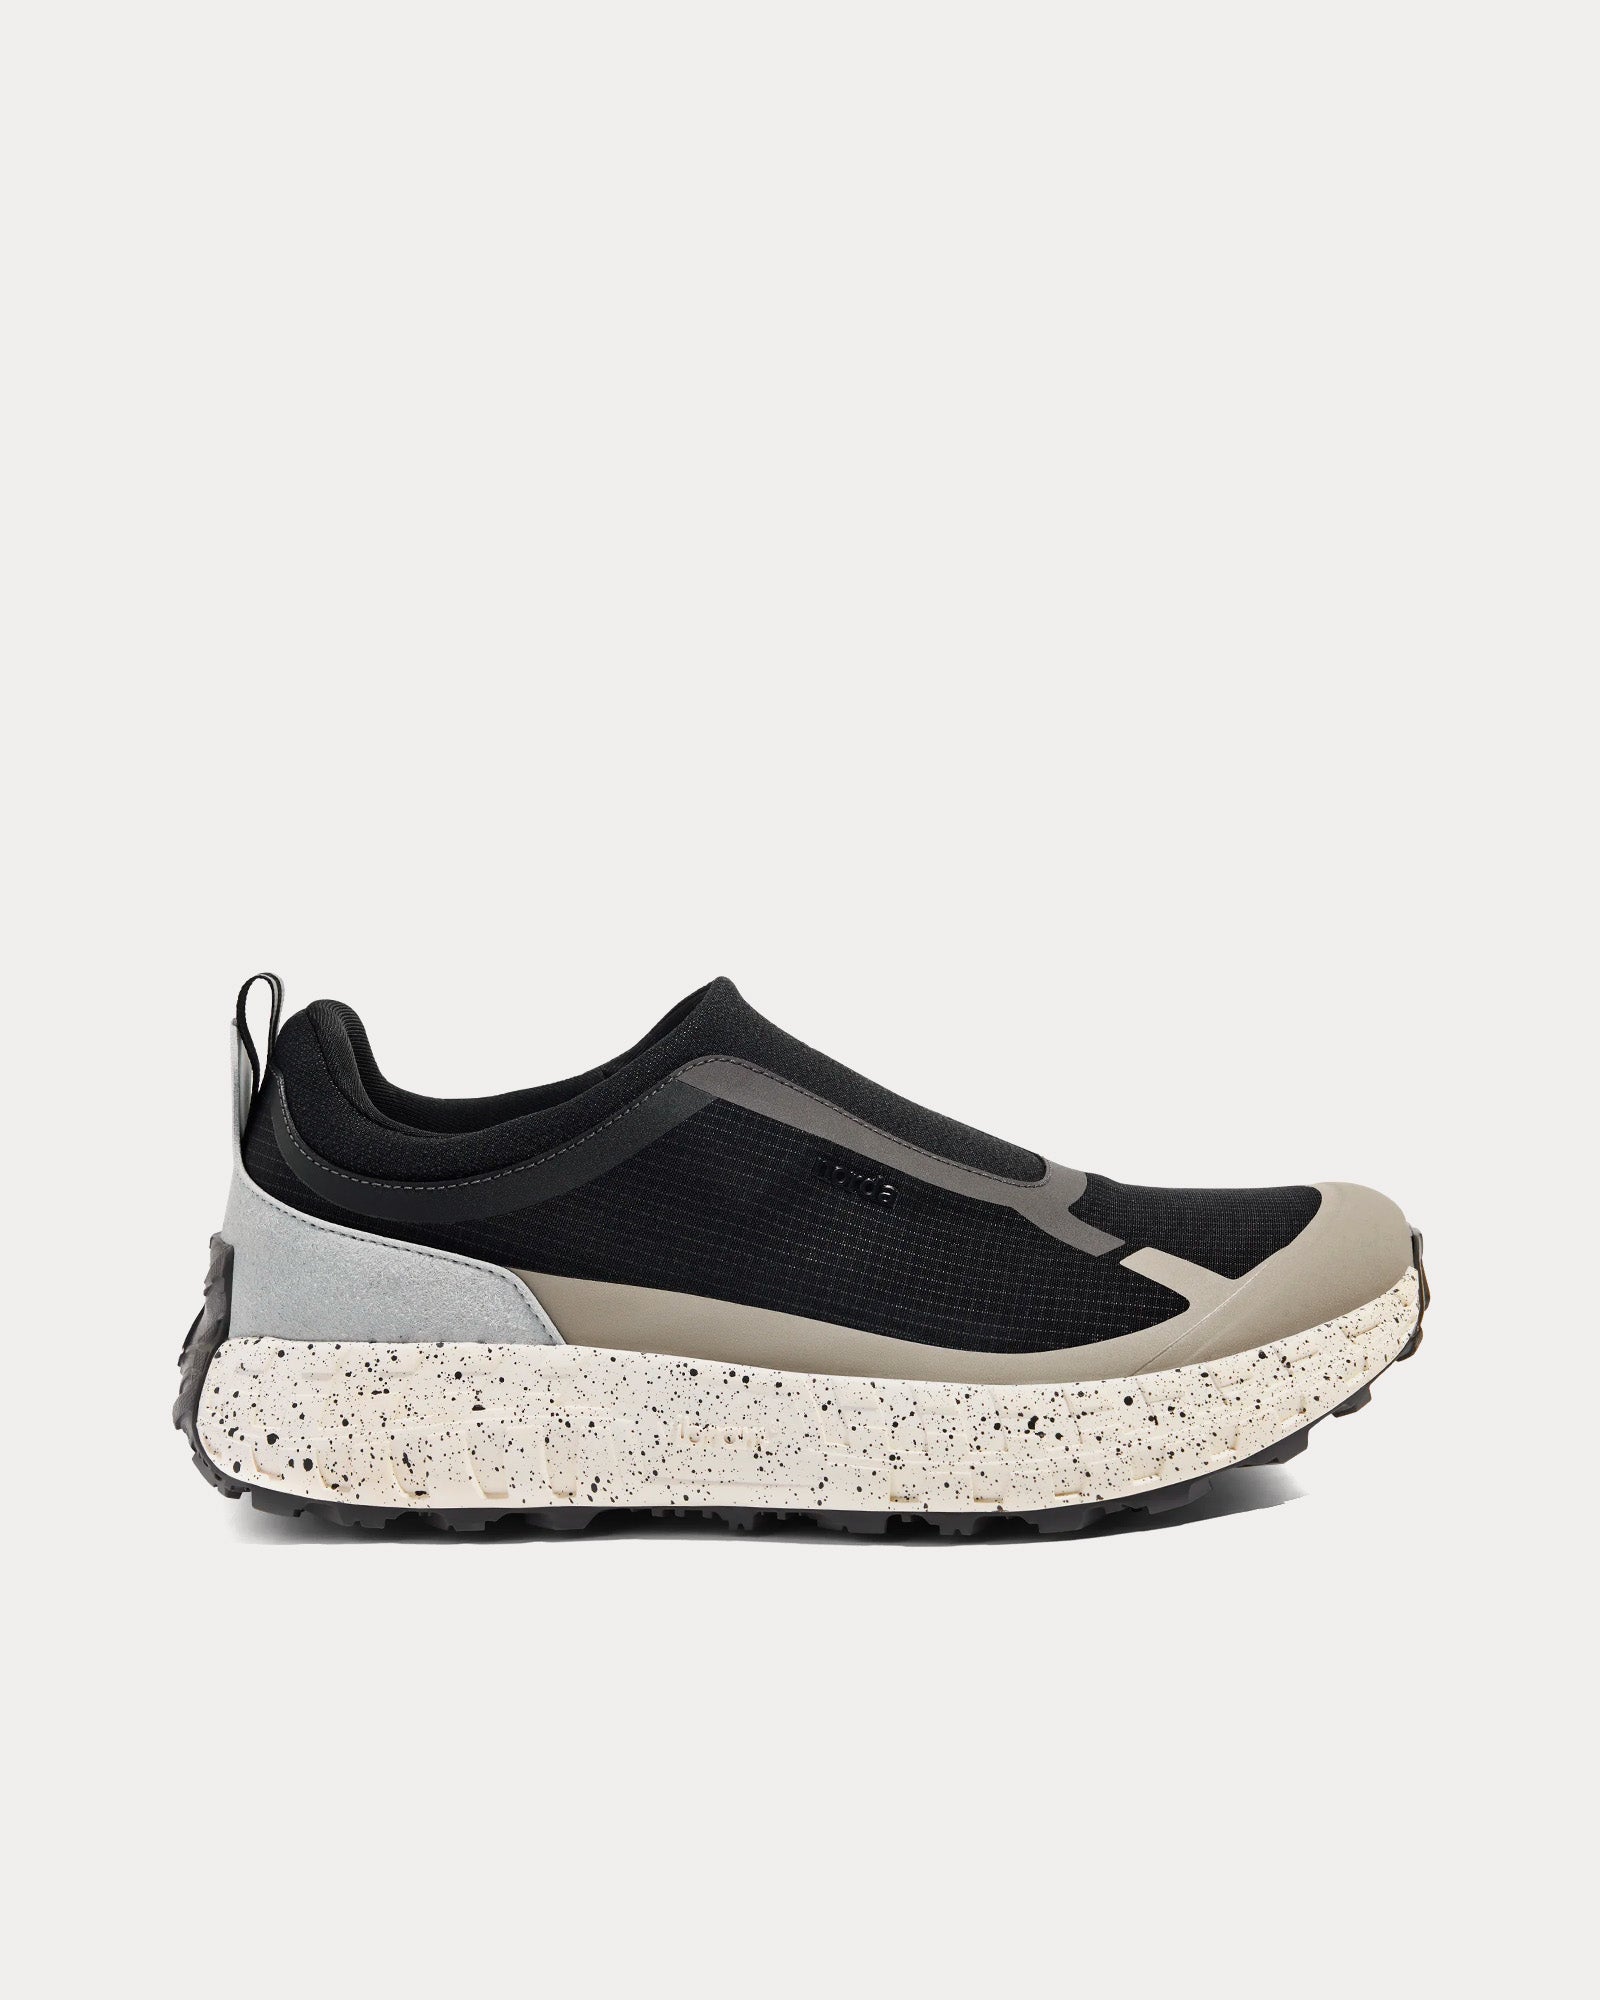 Norda x Haven - 003 M Quarry Running Shoes